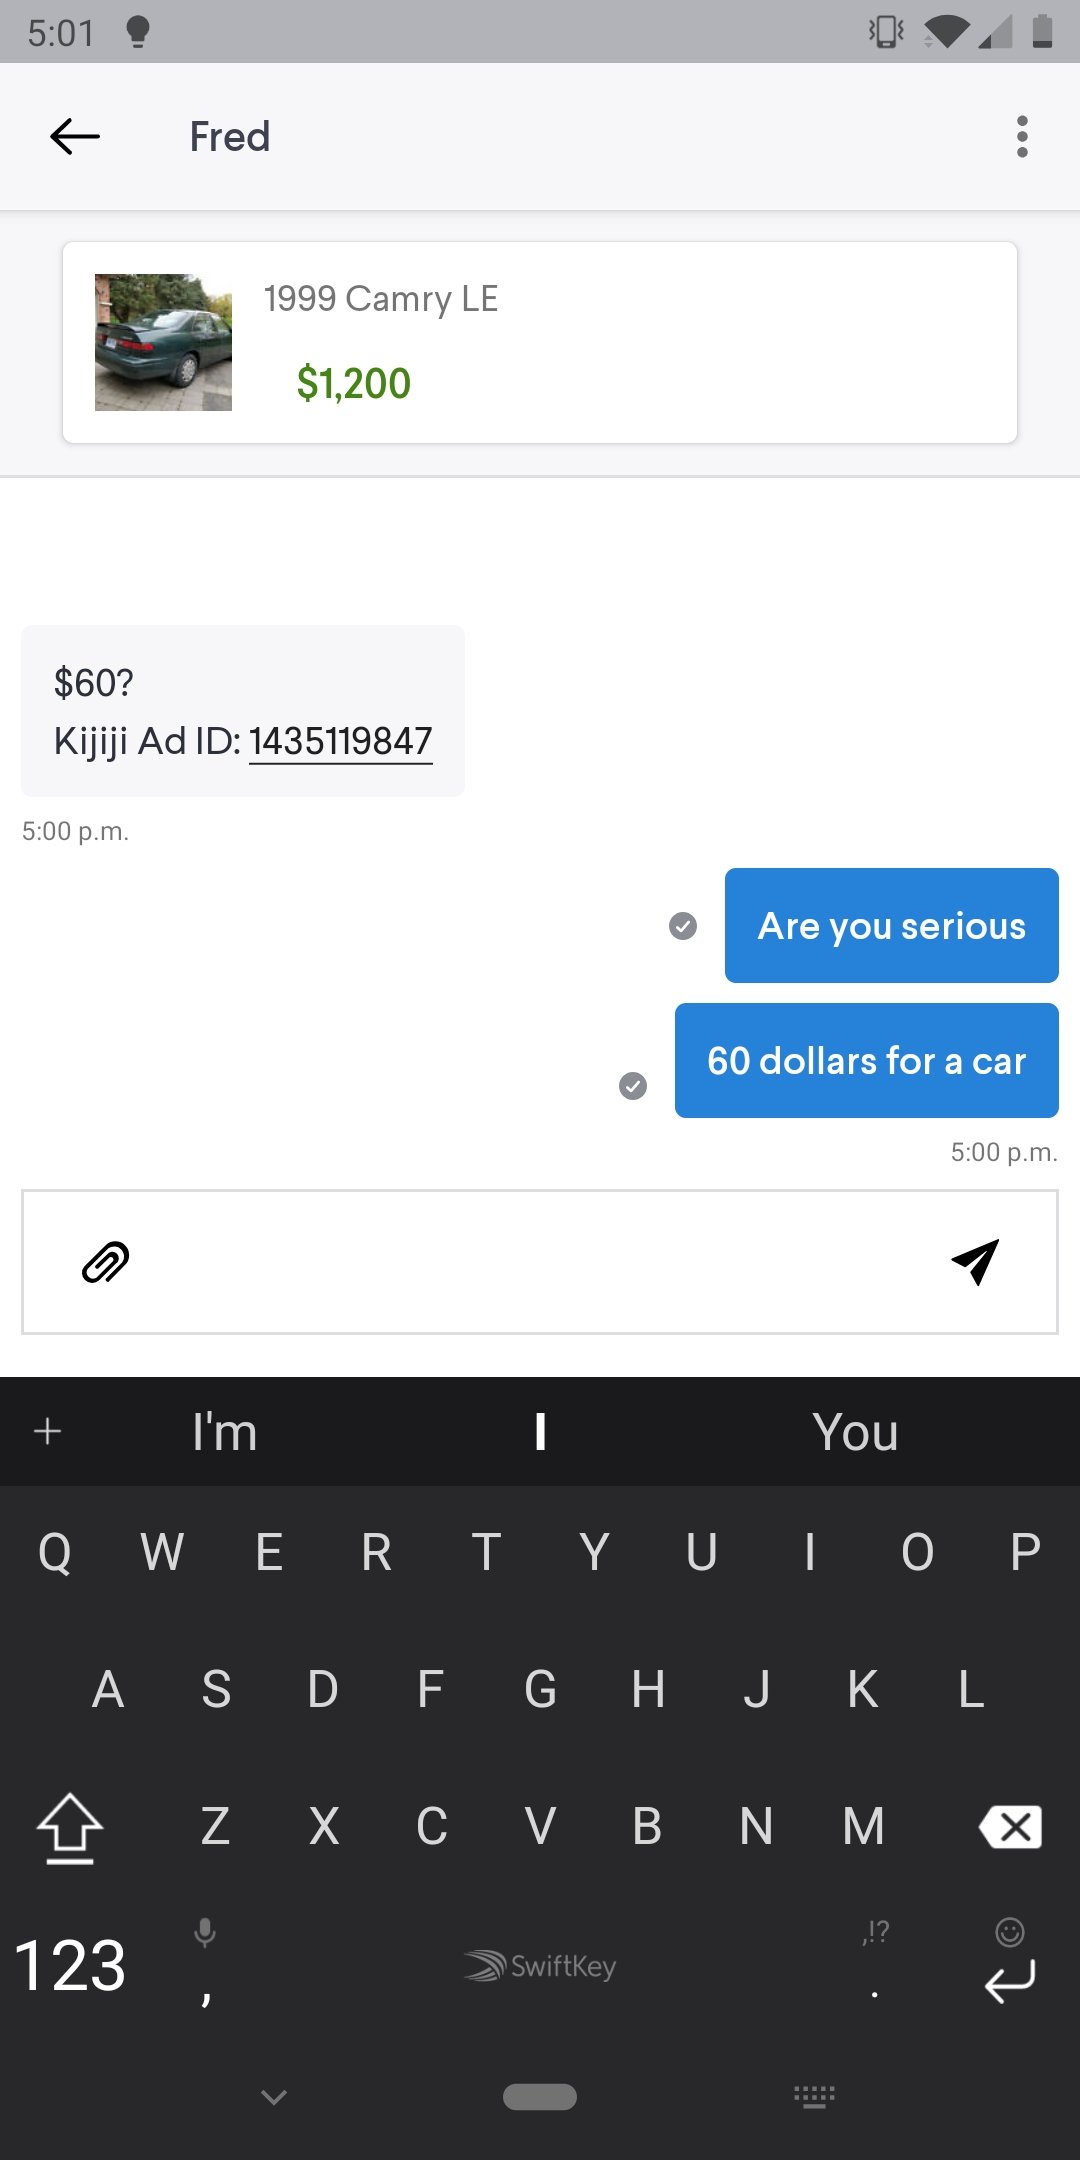 screenshot - ? f Fred 1999 Camry Le $1,200 $60? Kijiji Ad Id 1435119847 p.m. Are you serious 60 dollars for a car p.m. I'm You Qwerty U Top La S D F G H J K L Z X c V B N M 123 switsey SwiftKey o